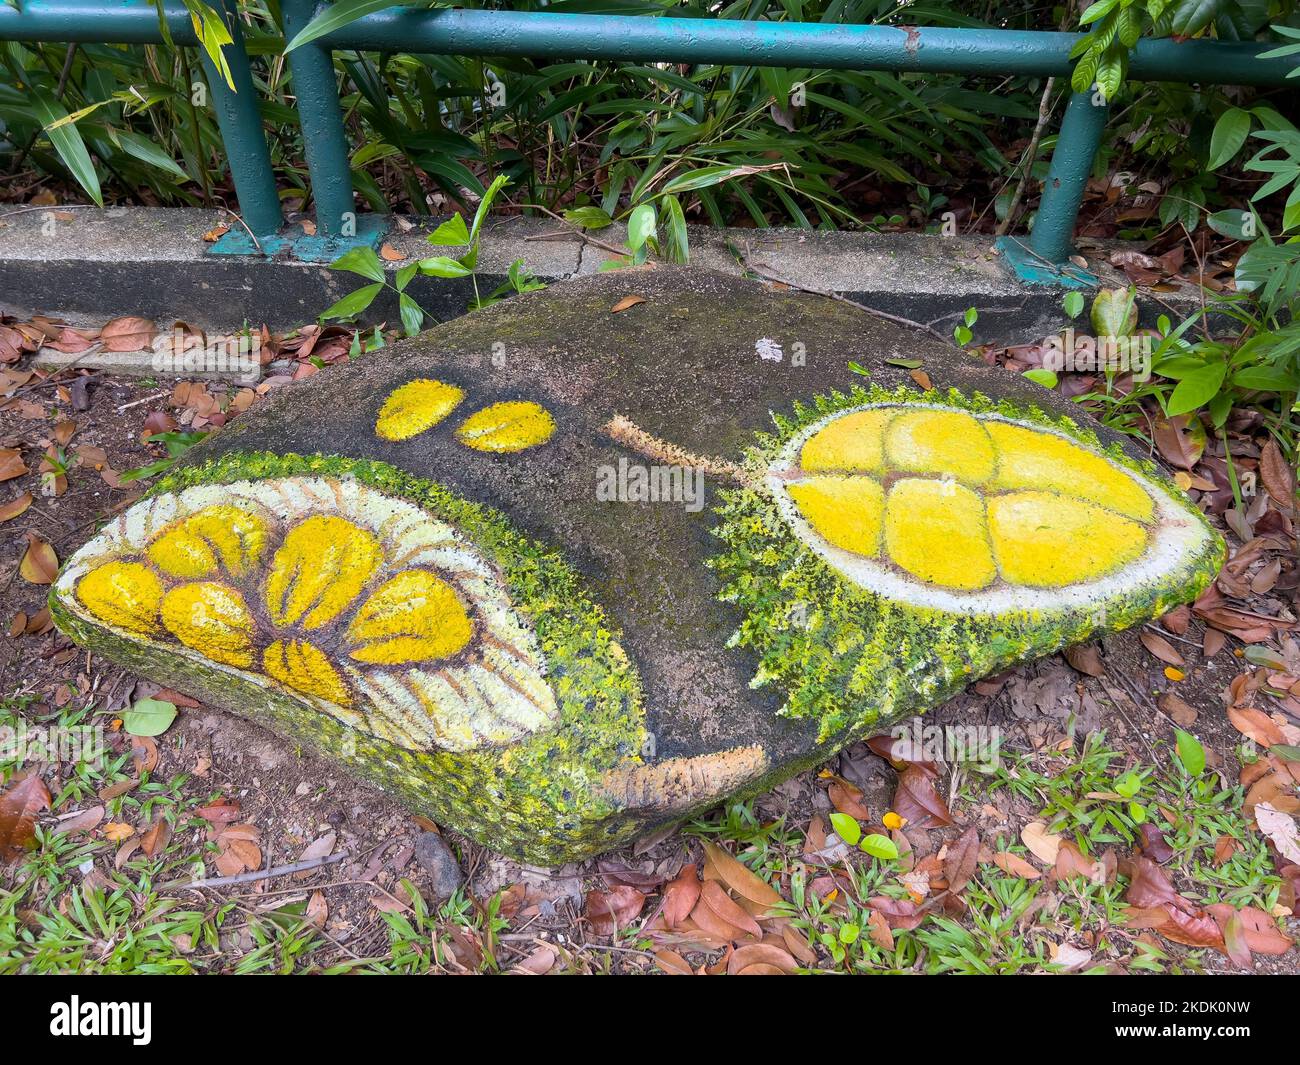 Painting of durian on a large rock at an outdoor environment for the visitors to check out. Stock Photo